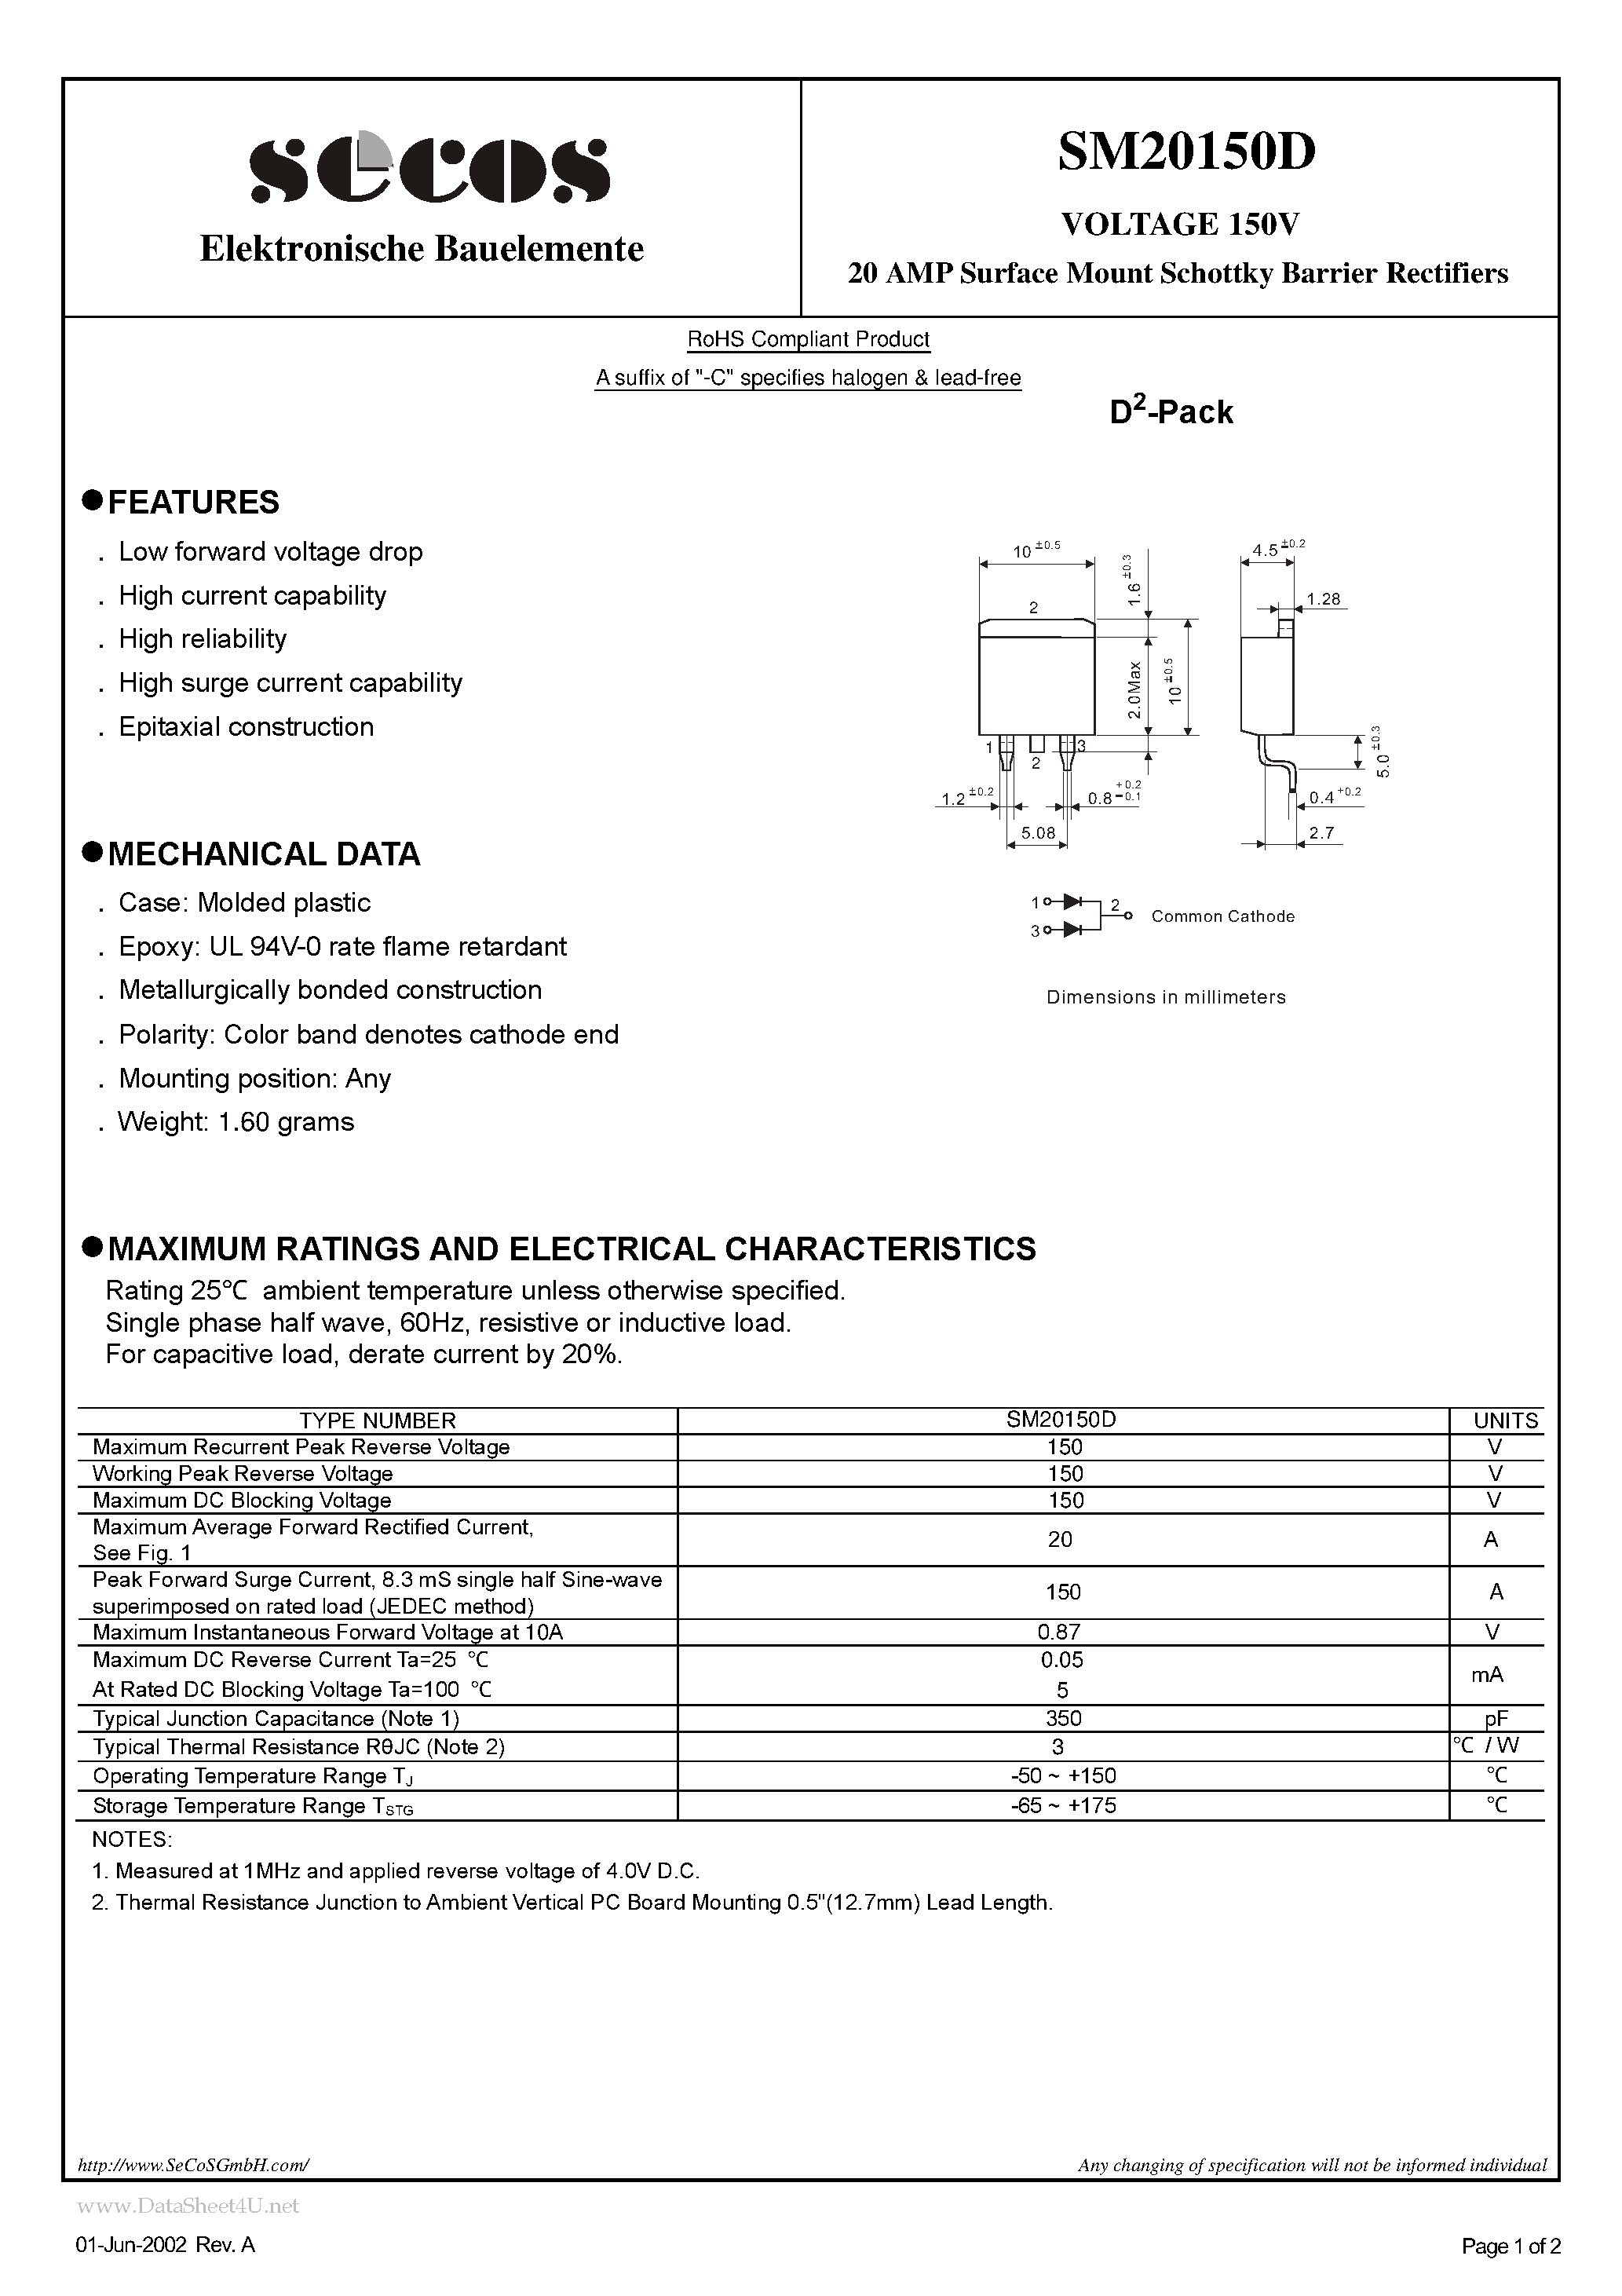 Datasheet SM20150D - 20 AMP Surface Mount Schottky Barrier Rectifiers page 1